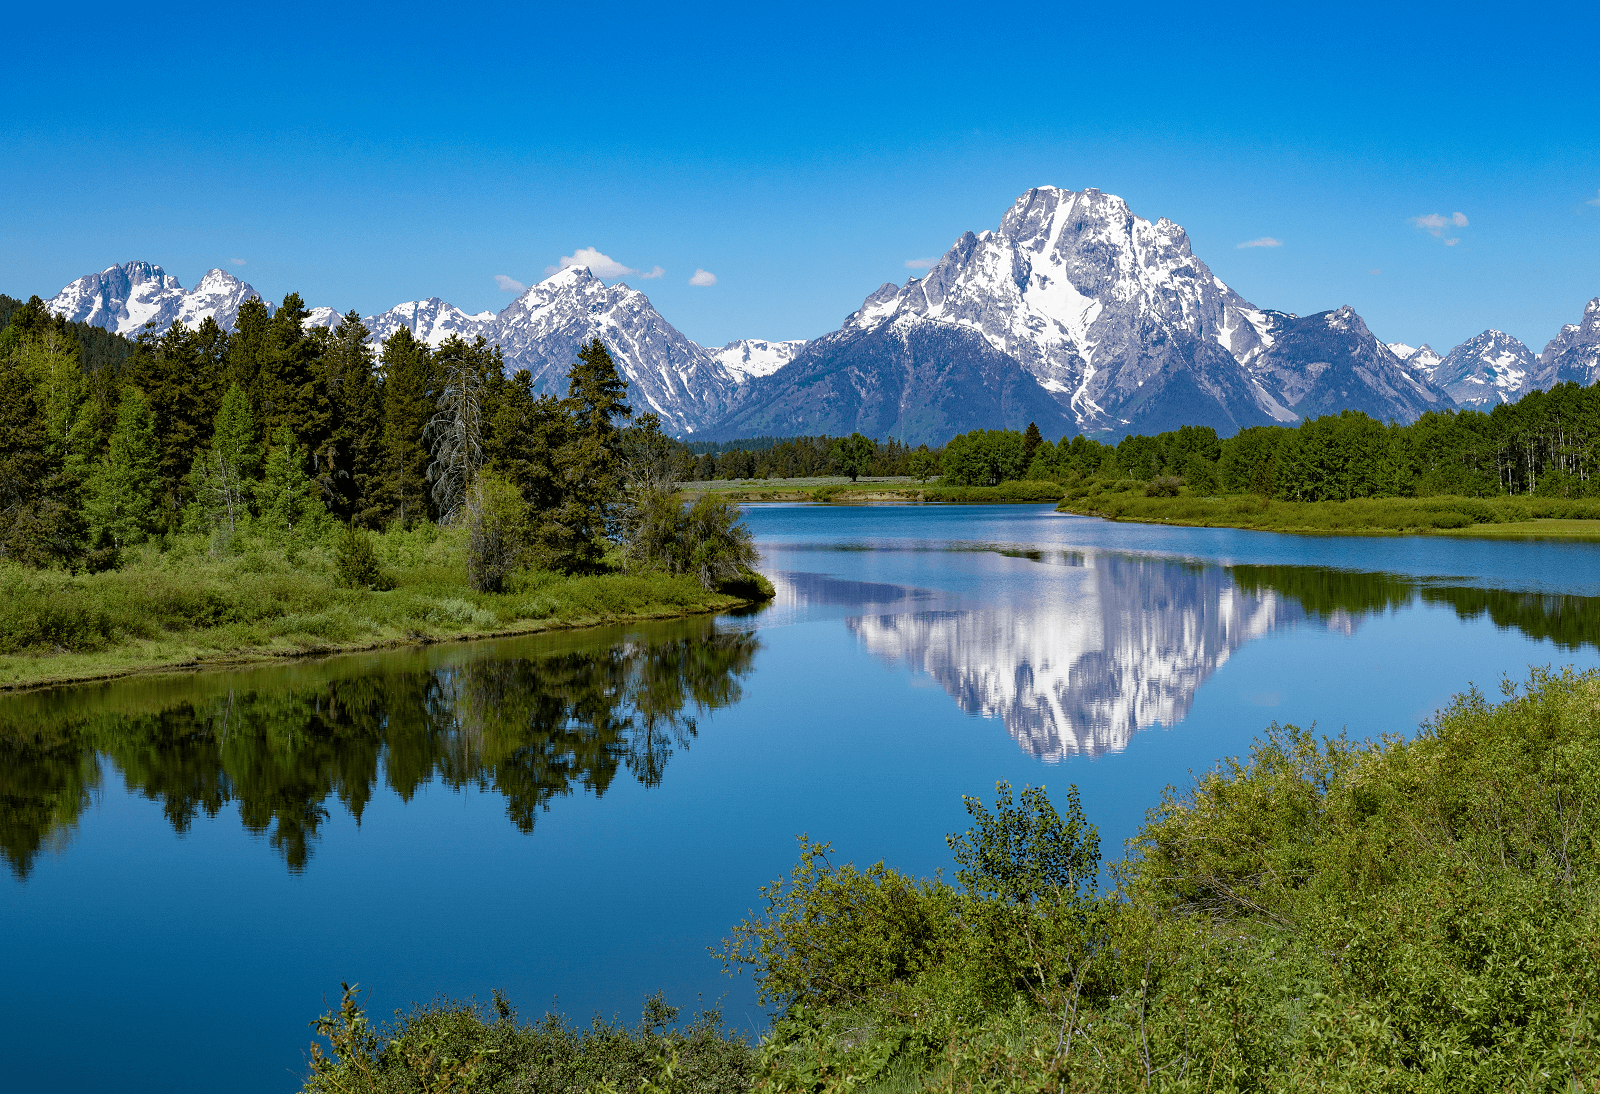 View of the river and snowy mountain